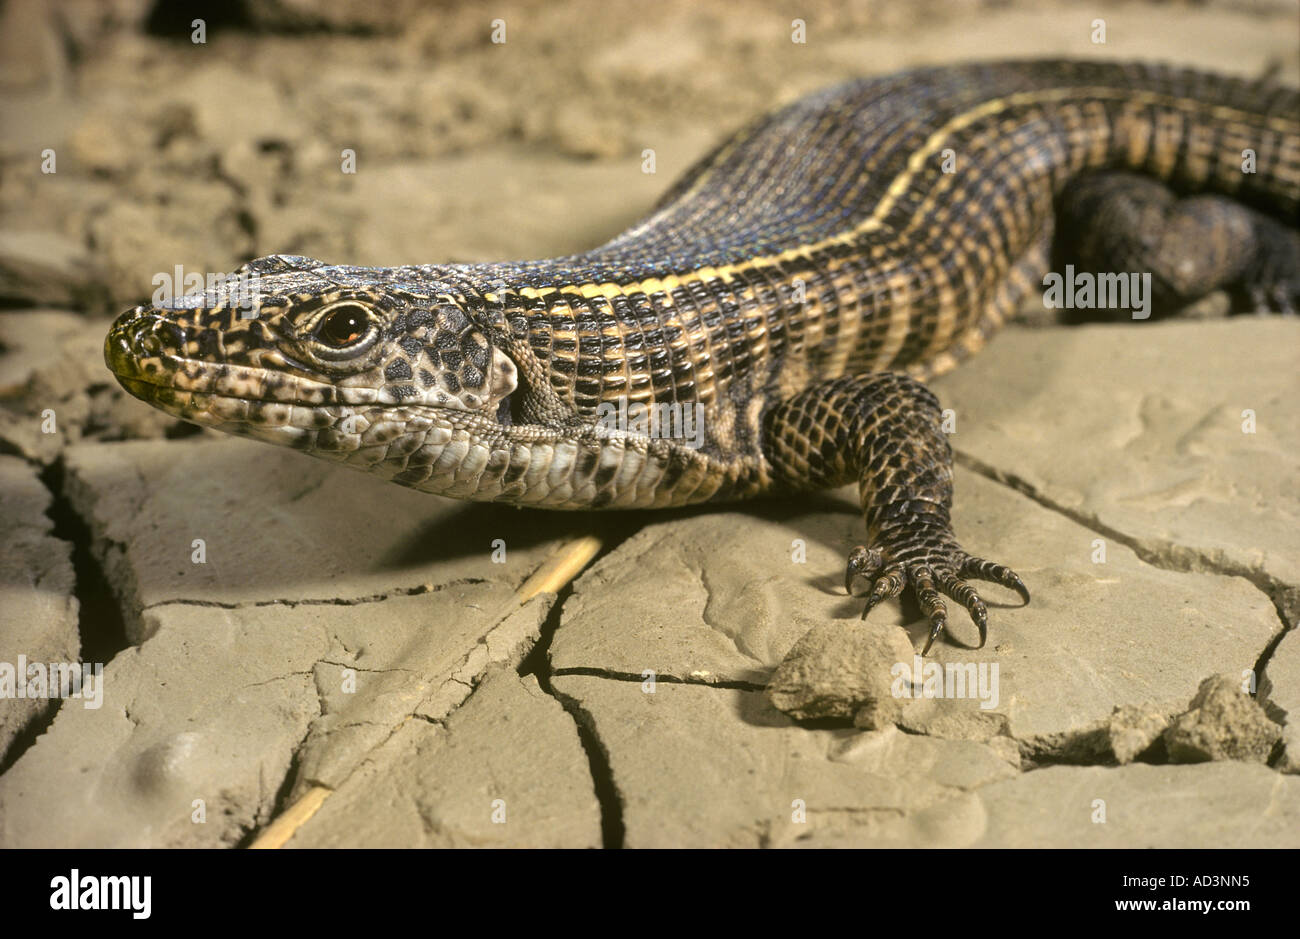 Smiths Plated Rock Lizard Africa Stock Photo